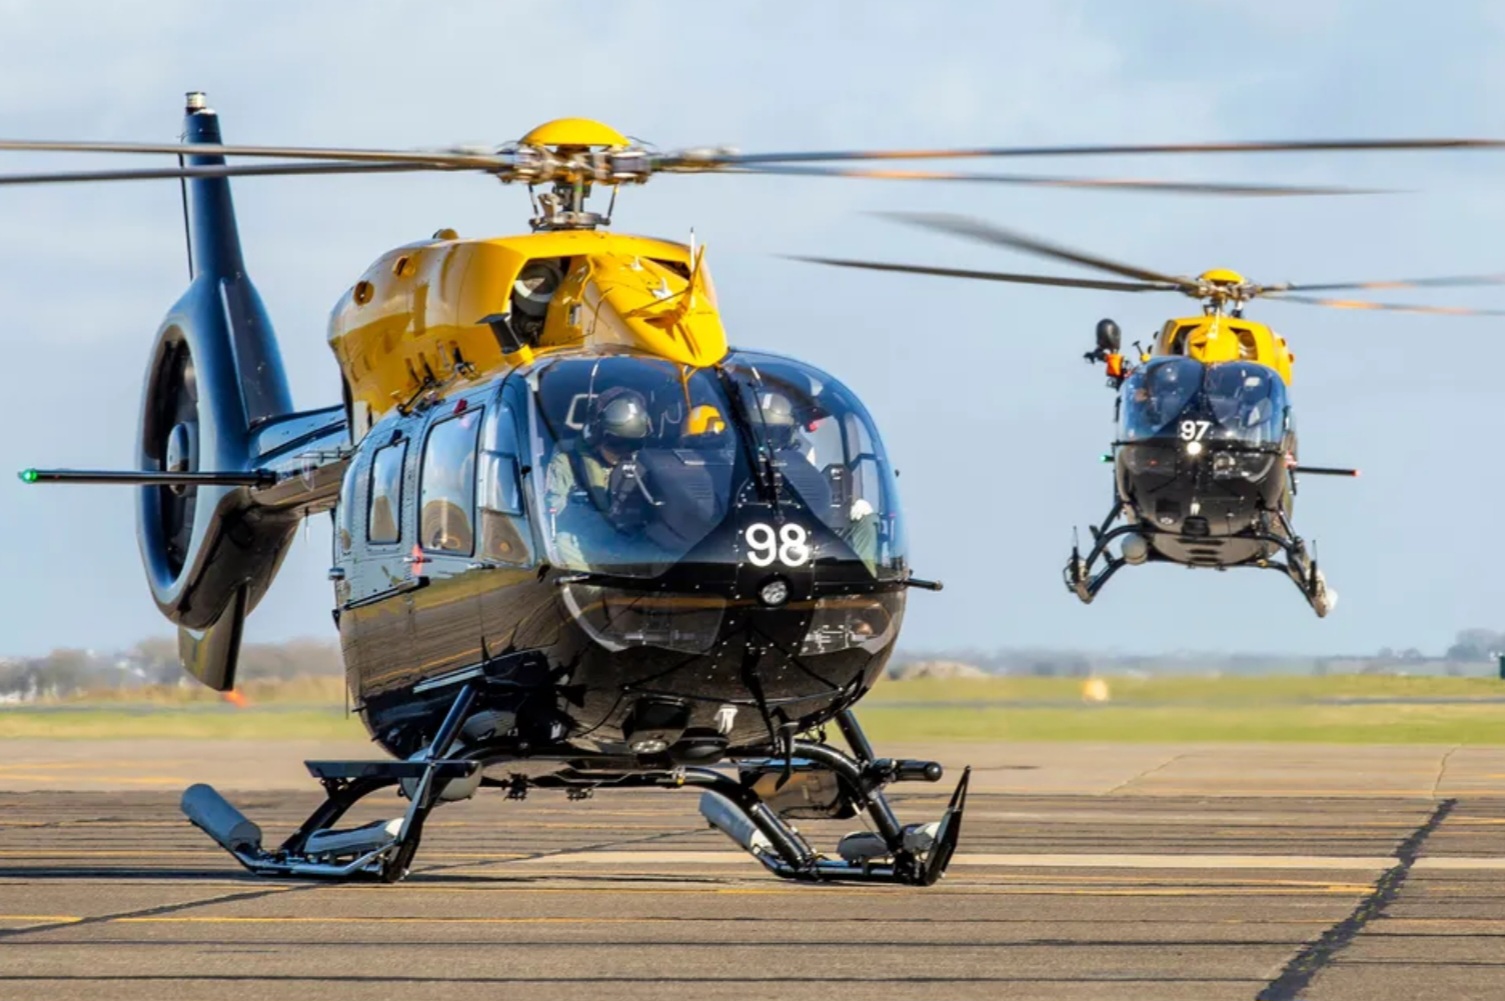 Airbus is selling a further 6 H145s to the UK Ministry of Defense for use in Cyprus and Brunei